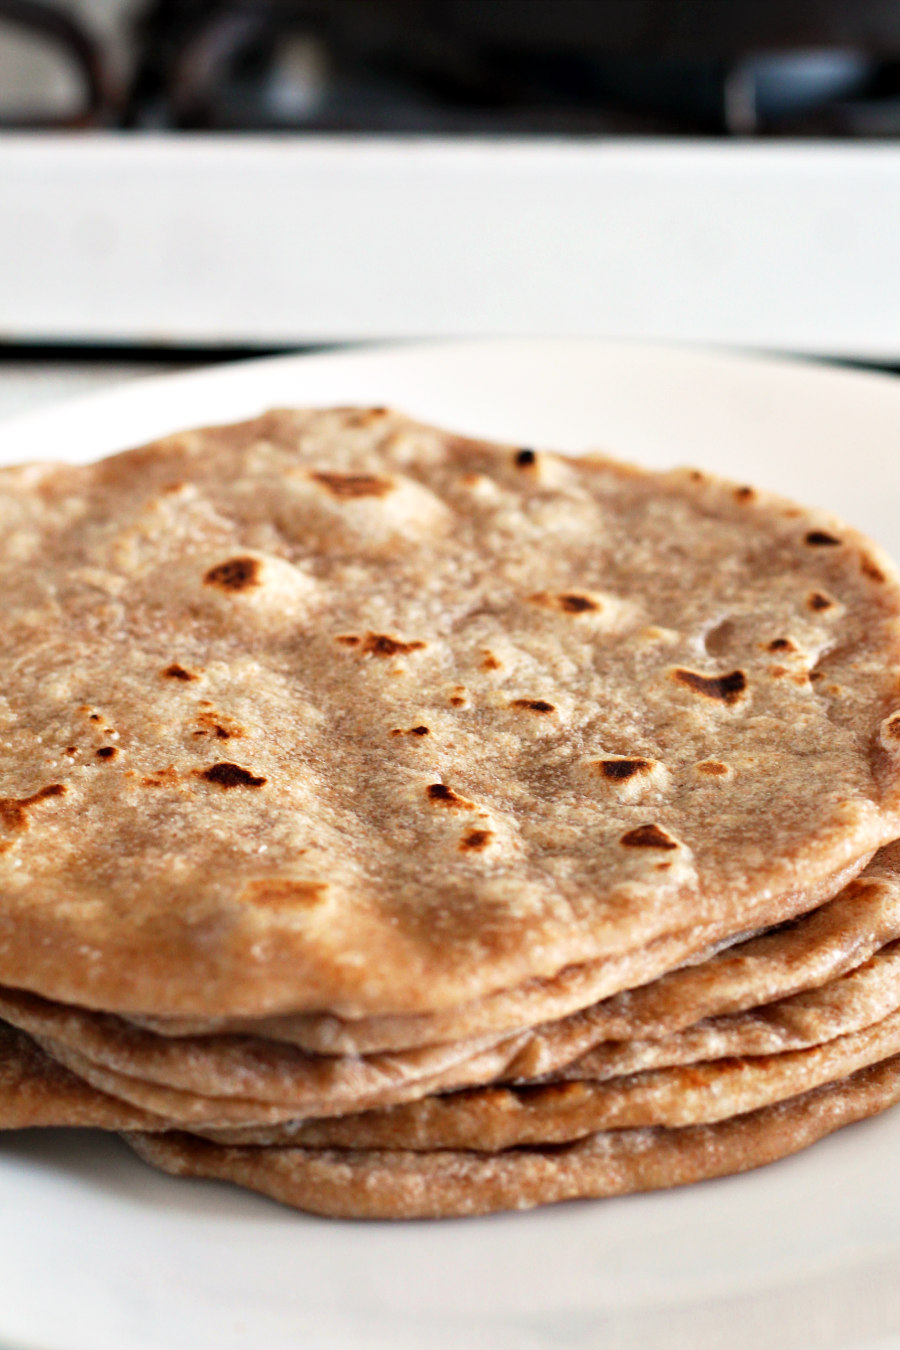 Half Whole Wheat Homemade Tortillas stacked on a white plate. Plate sits in front of gas stove.